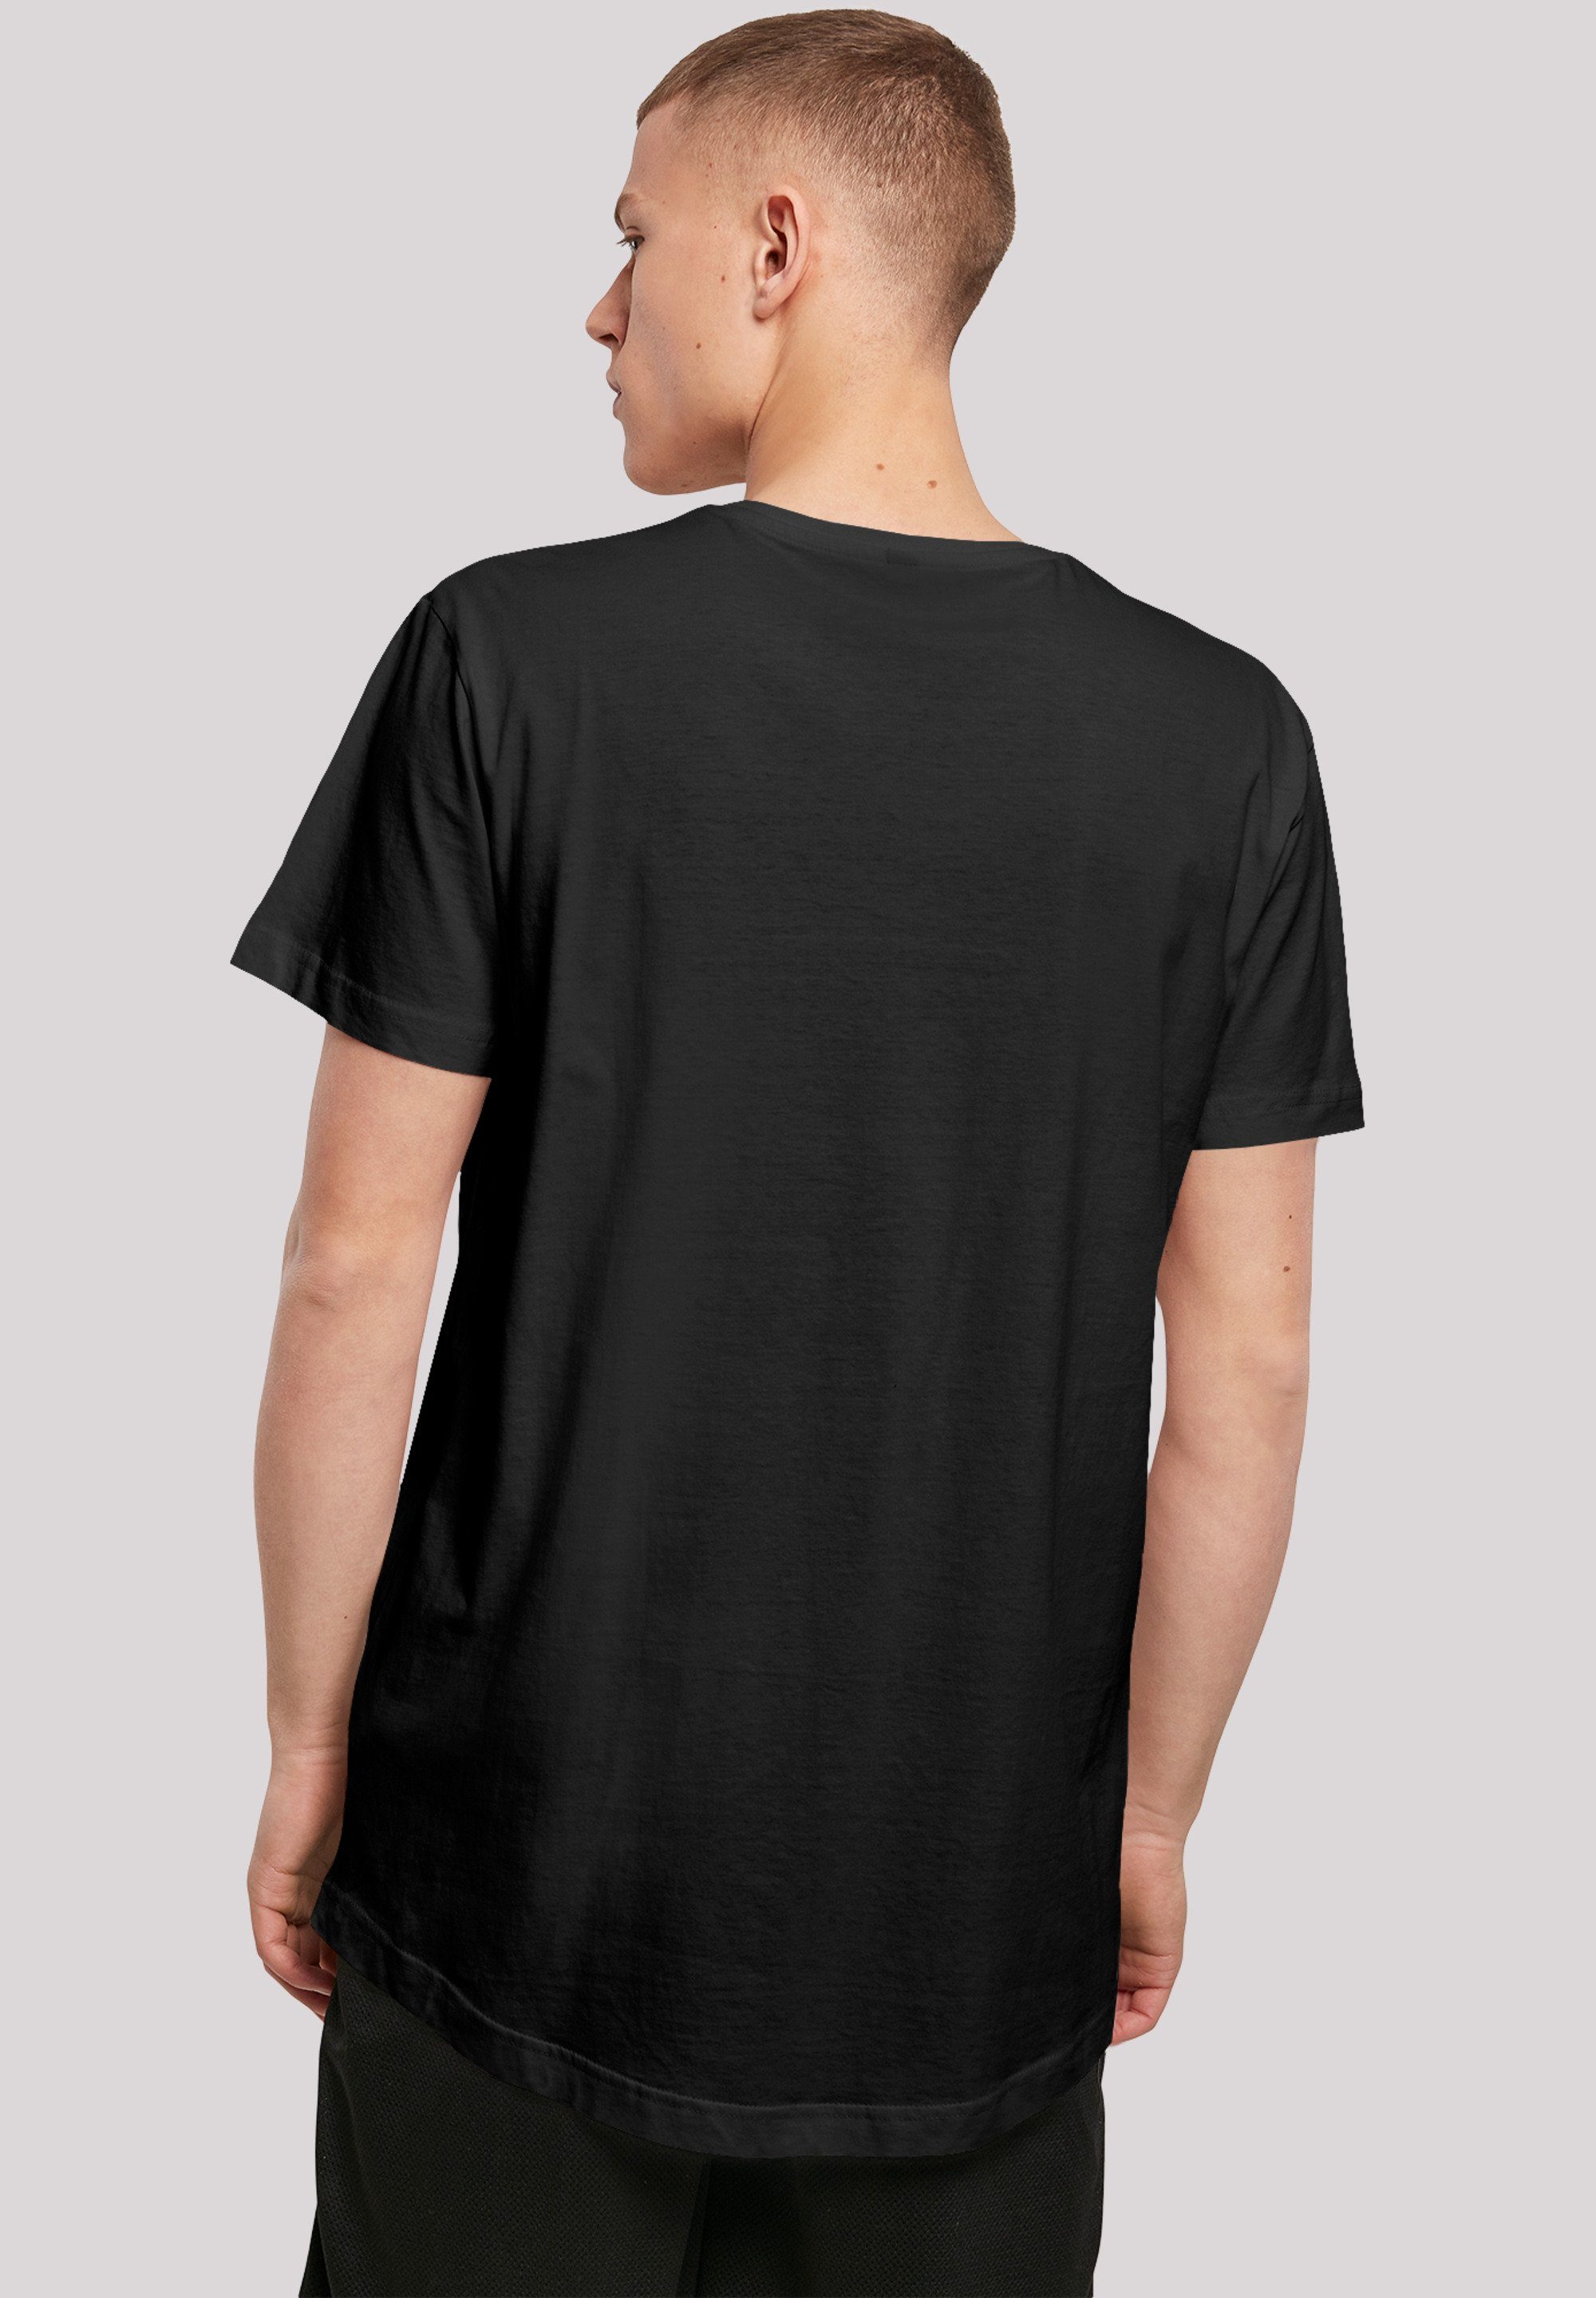 Shaped Kurzarmshirt Martian Tee Marvin with Herren (1-tlg) Long The black Face F4NT4STIC